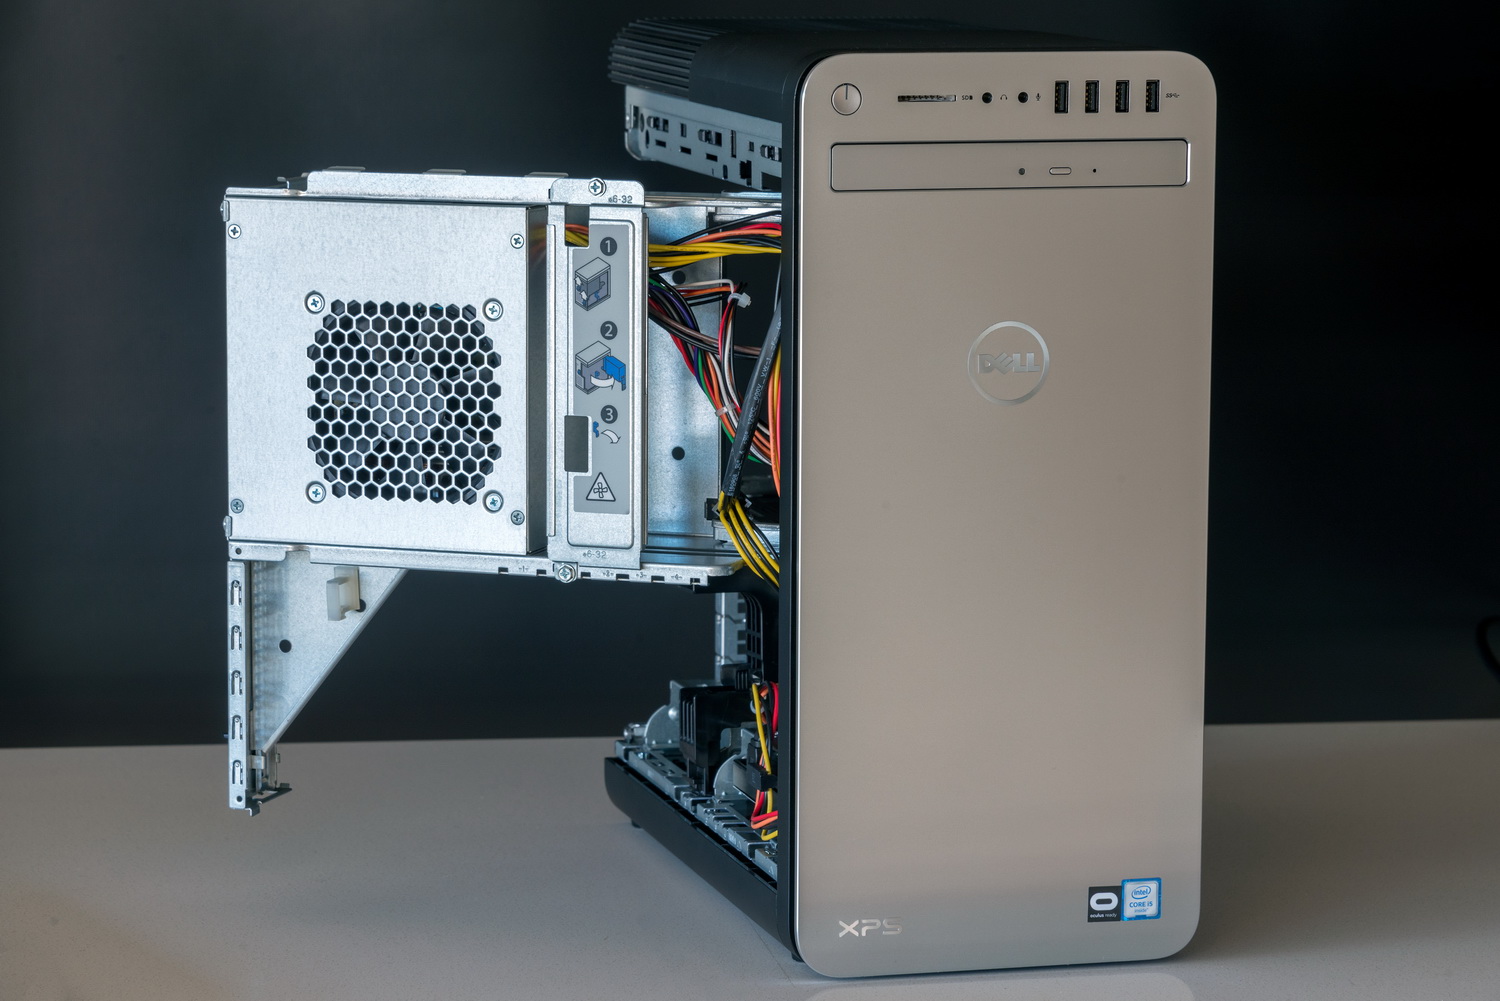 Dell XPS Tower Special Edition 8910 SE Review | Digital Trends